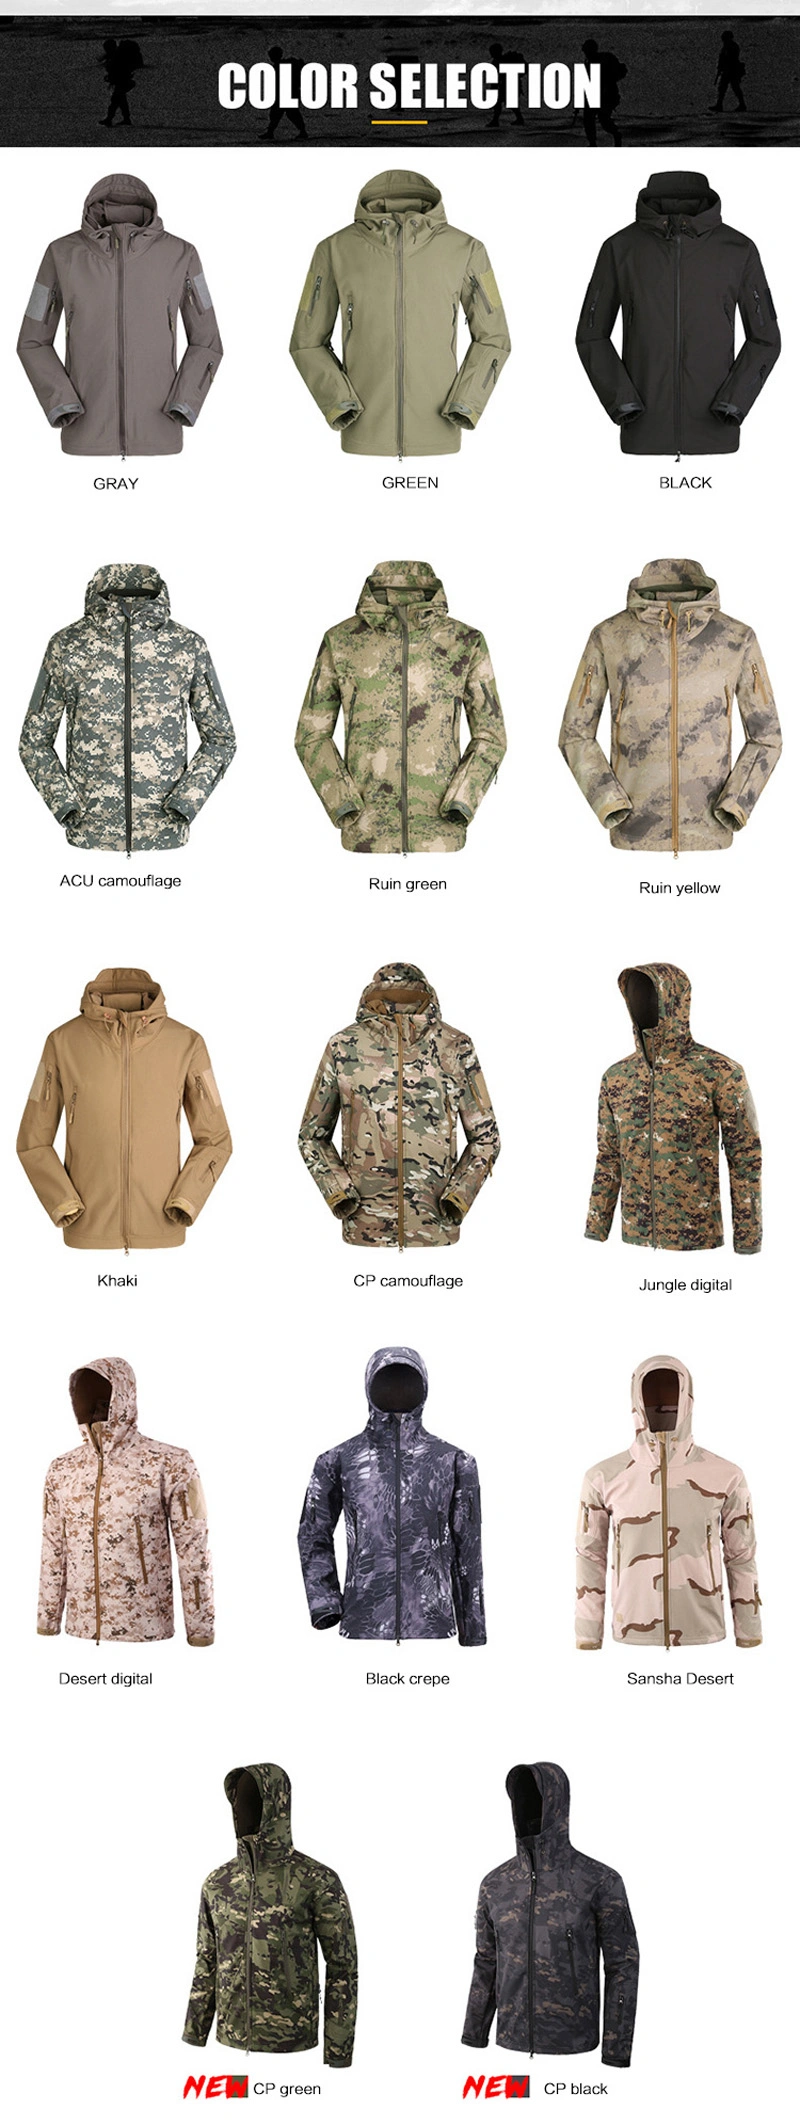 Windbreaker Softshell Army Camouflage Tactical Combat Hooded Outdoor Men Jacket